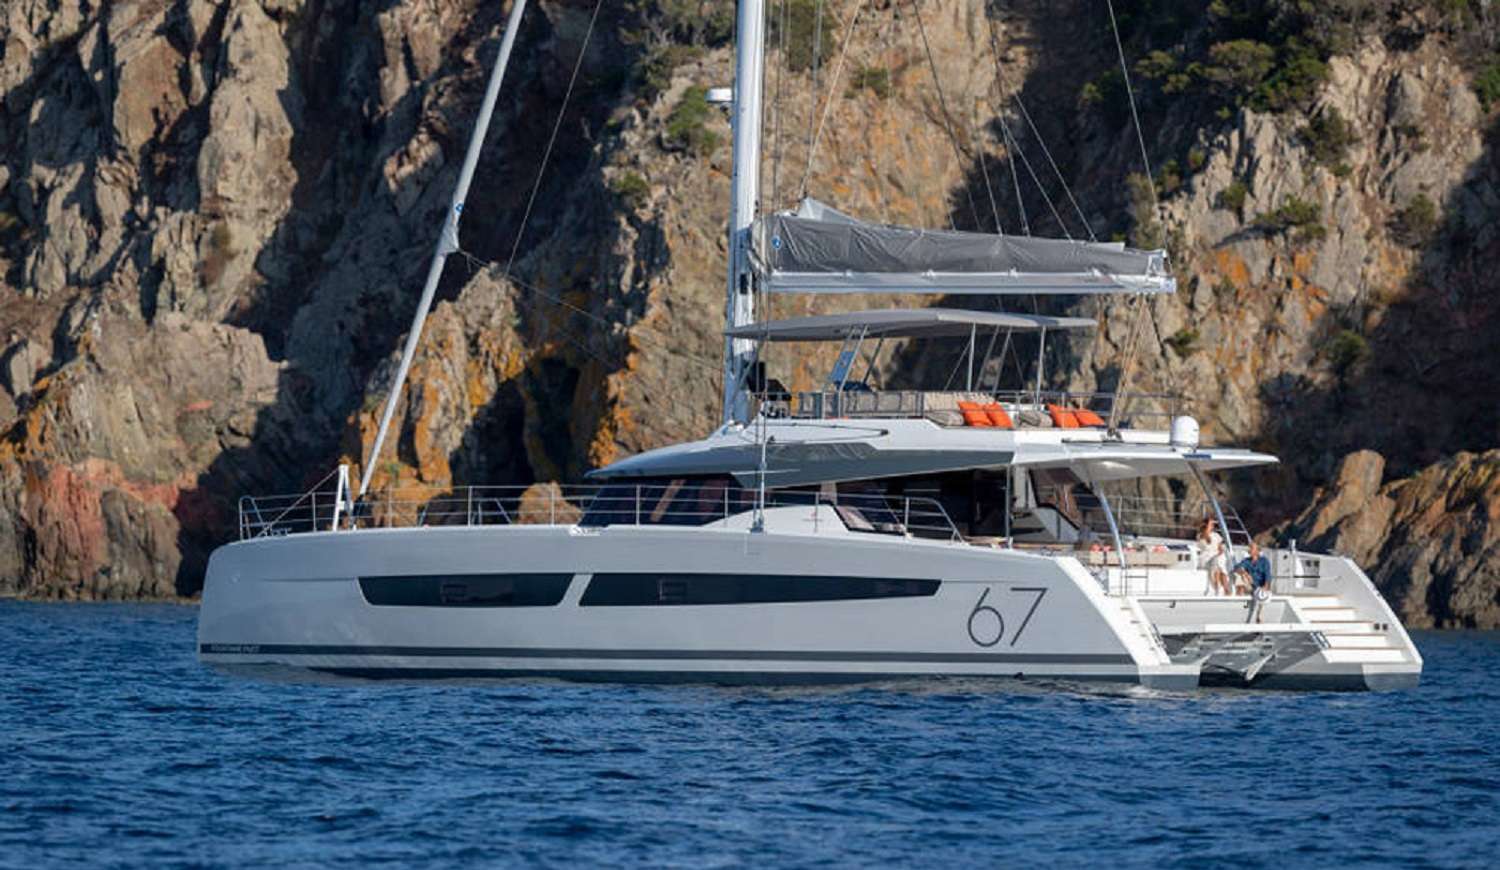 LOOMA - Yacht Charter Cannes & Boat hire in W. Med -Naples/Sicily, Greece, W. Med -Riviera/Cors/Sard., Turkey, Croatia | Winter: Caribbean Virgin Islands (US/BVI), Caribbean Leewards, Caribbean Windwards 2